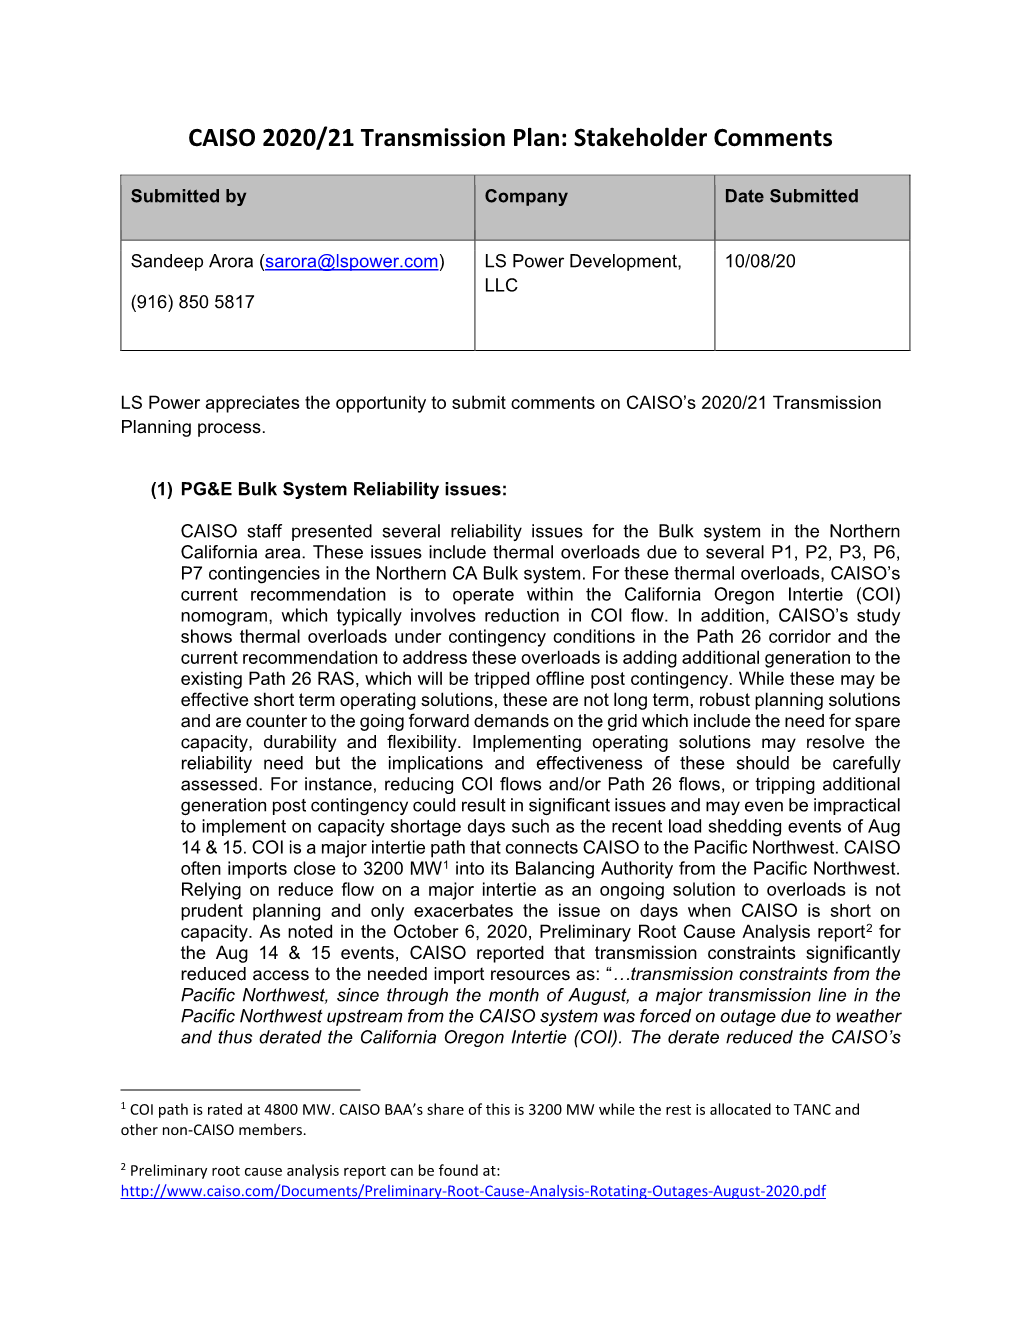 CAISO 2020/21 Transmission Plan: Stakeholder Comments